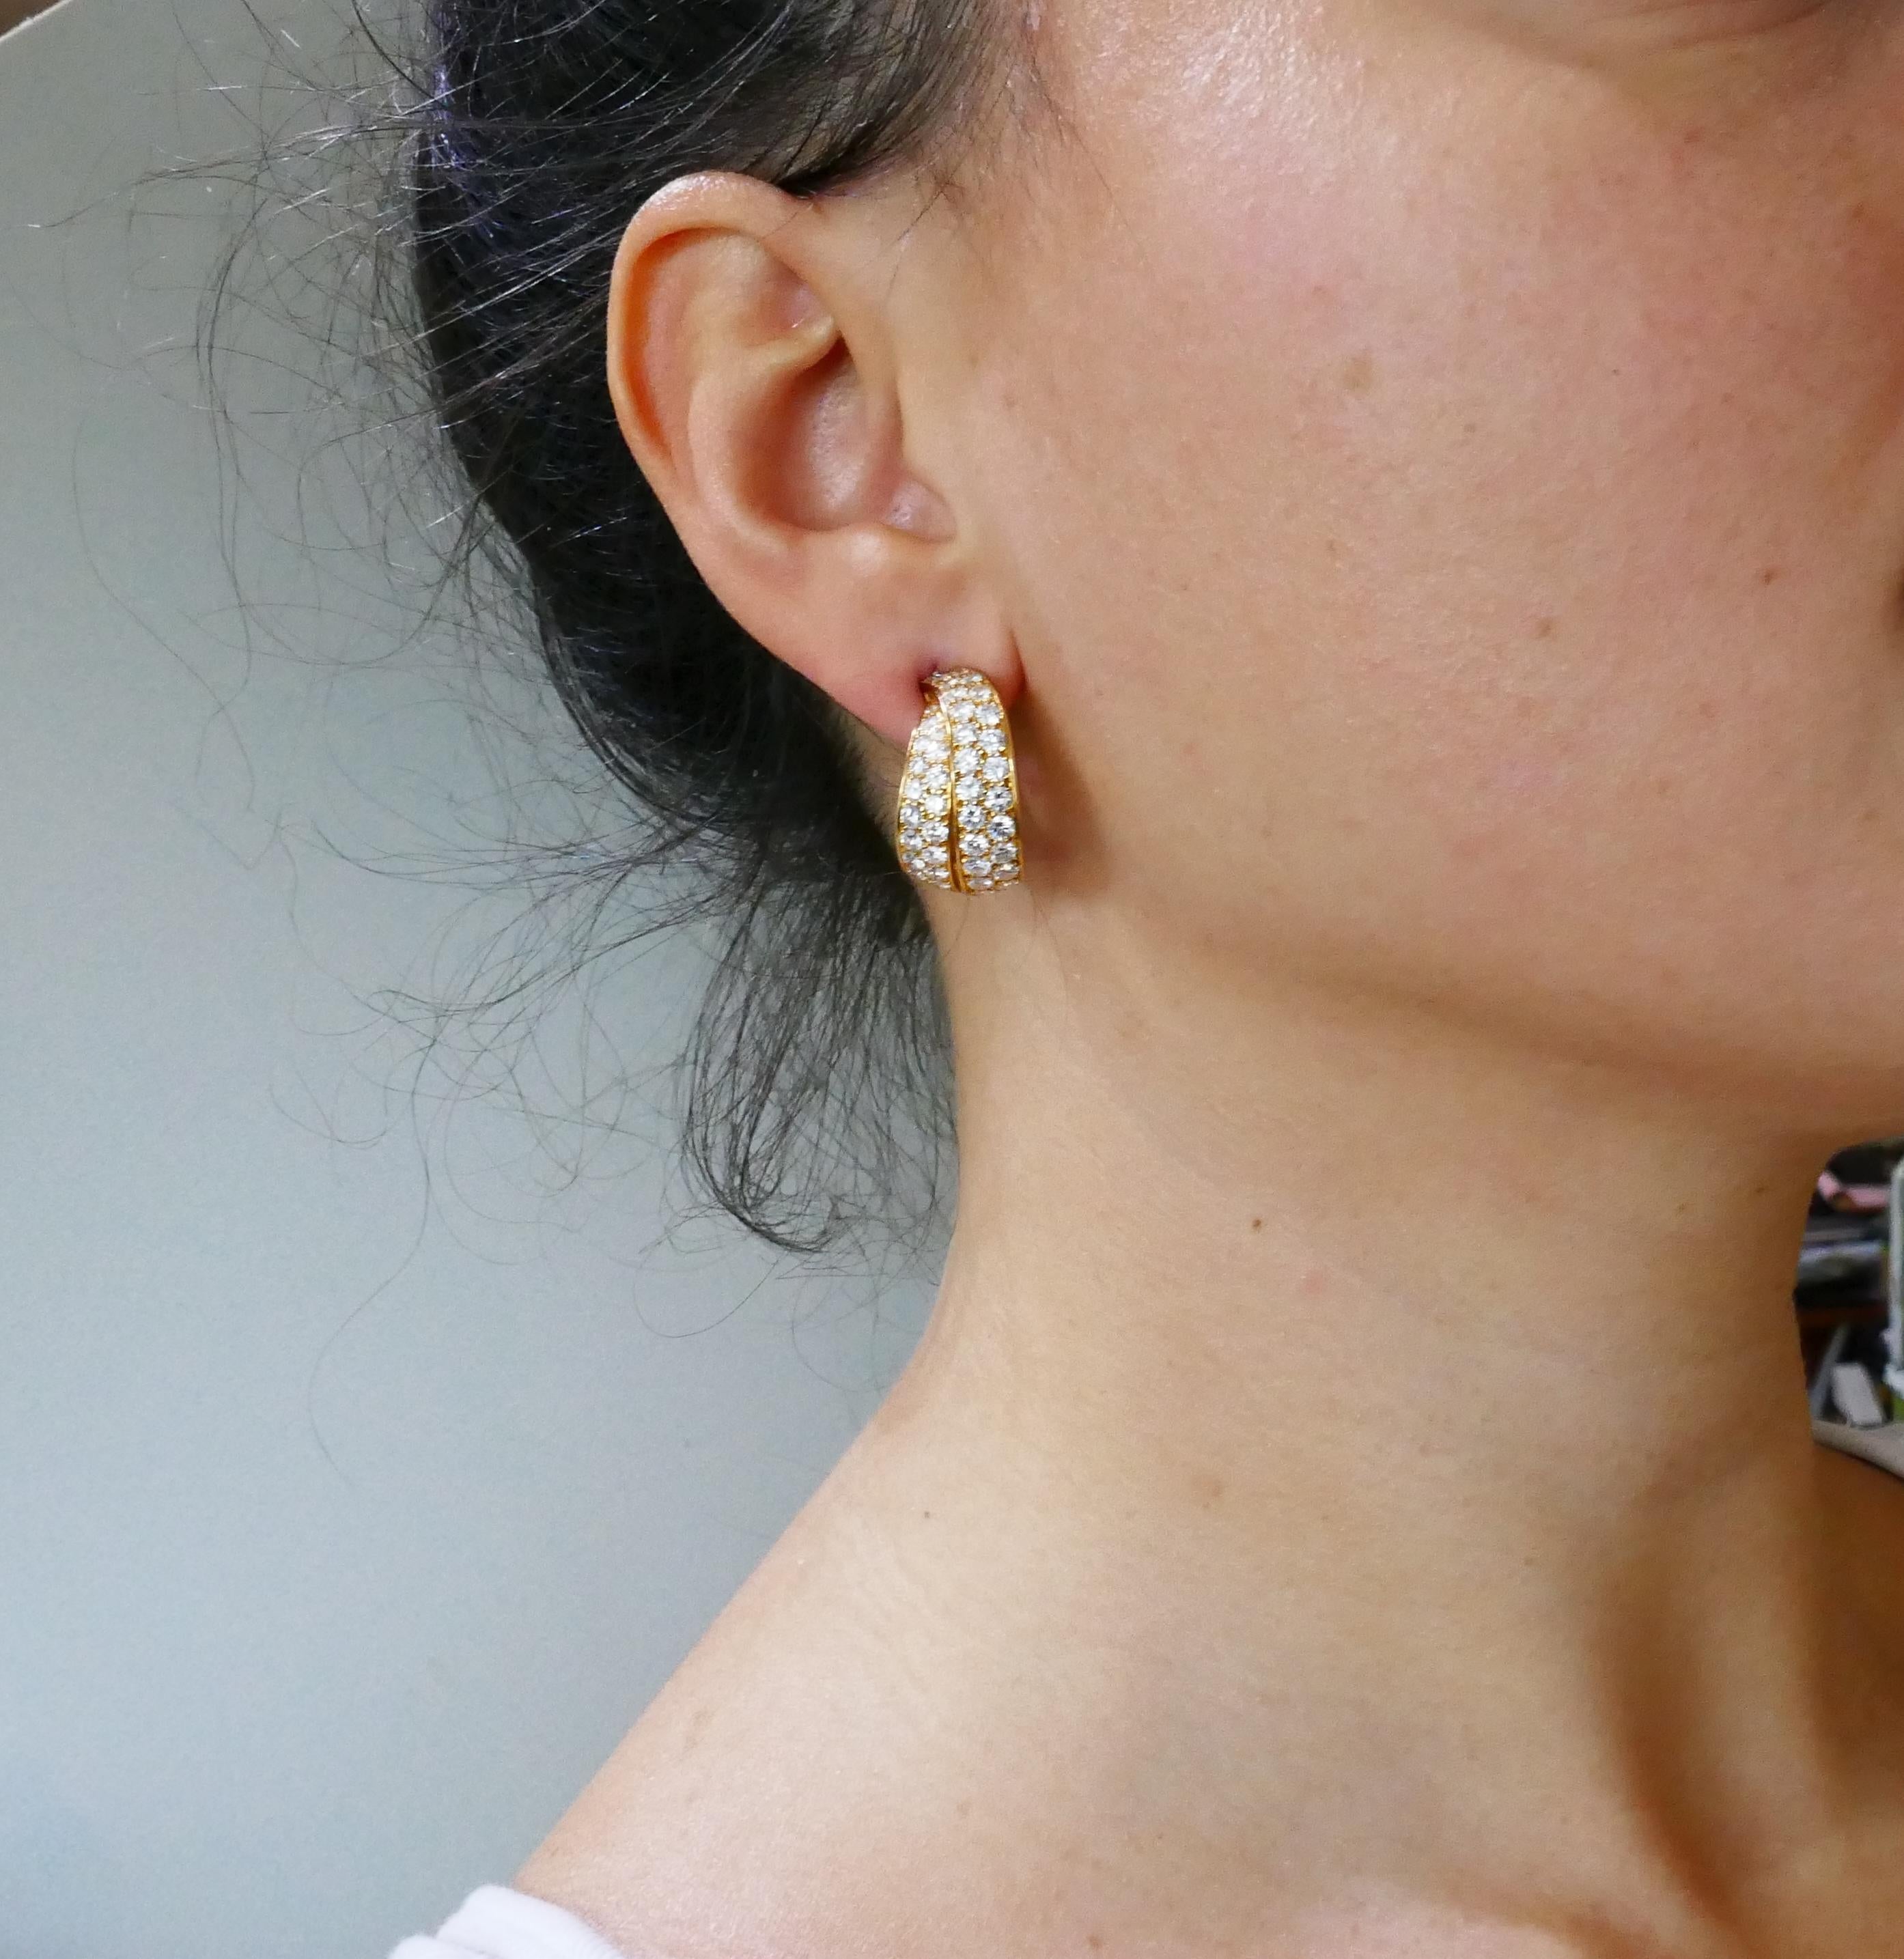 Timeless, chic and wearable hoop earrings that are a 